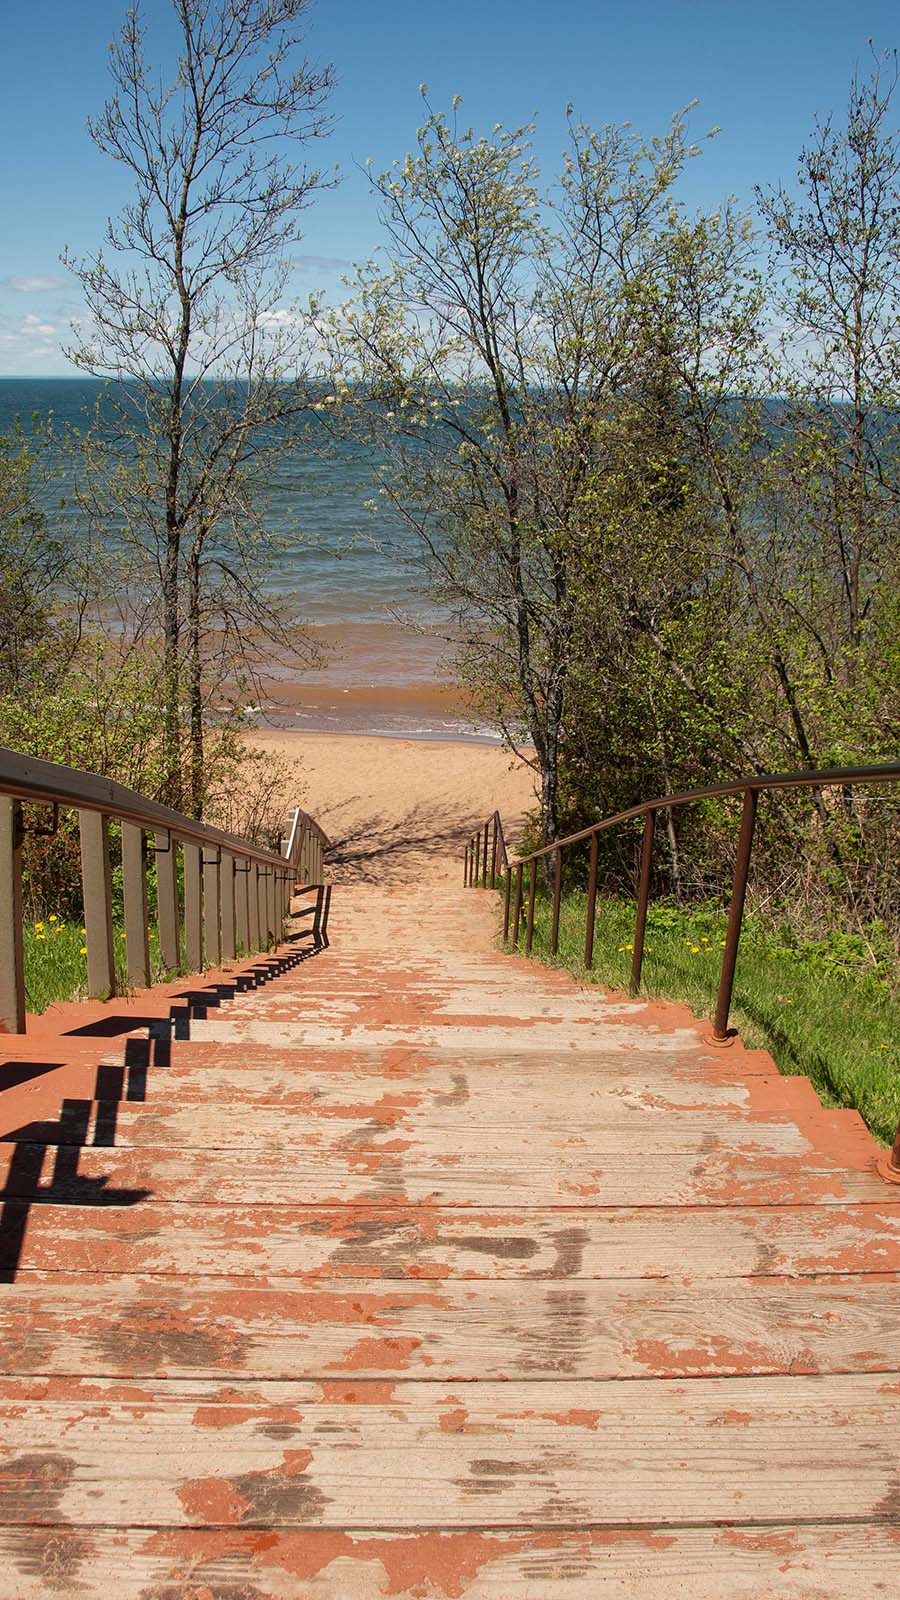 Steep steps bar access to Meyers Beach for people with mobility issues